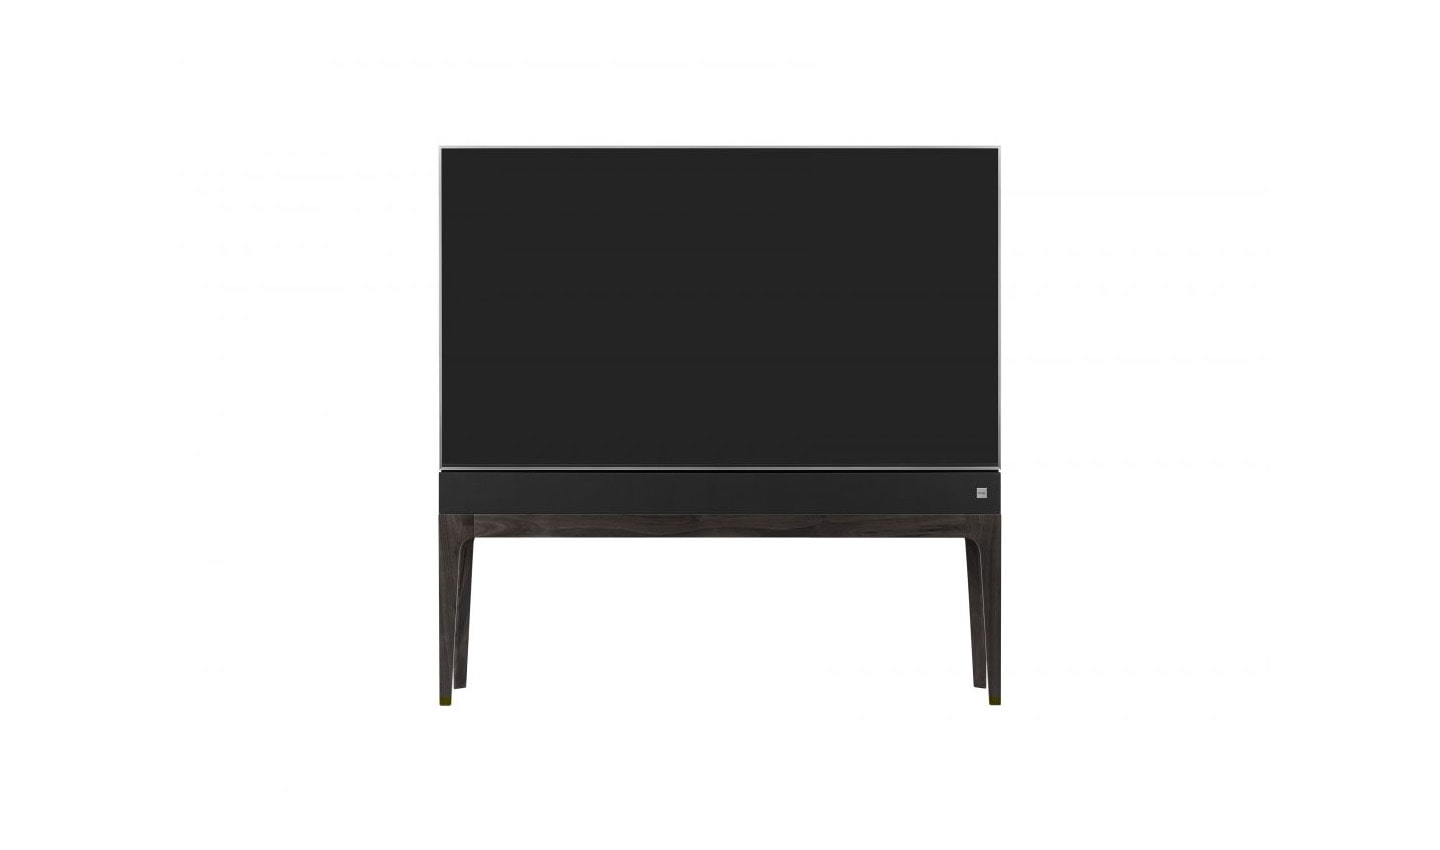 Front view of LG OBJET TV, which is built into a slender cabinet with wooden legs